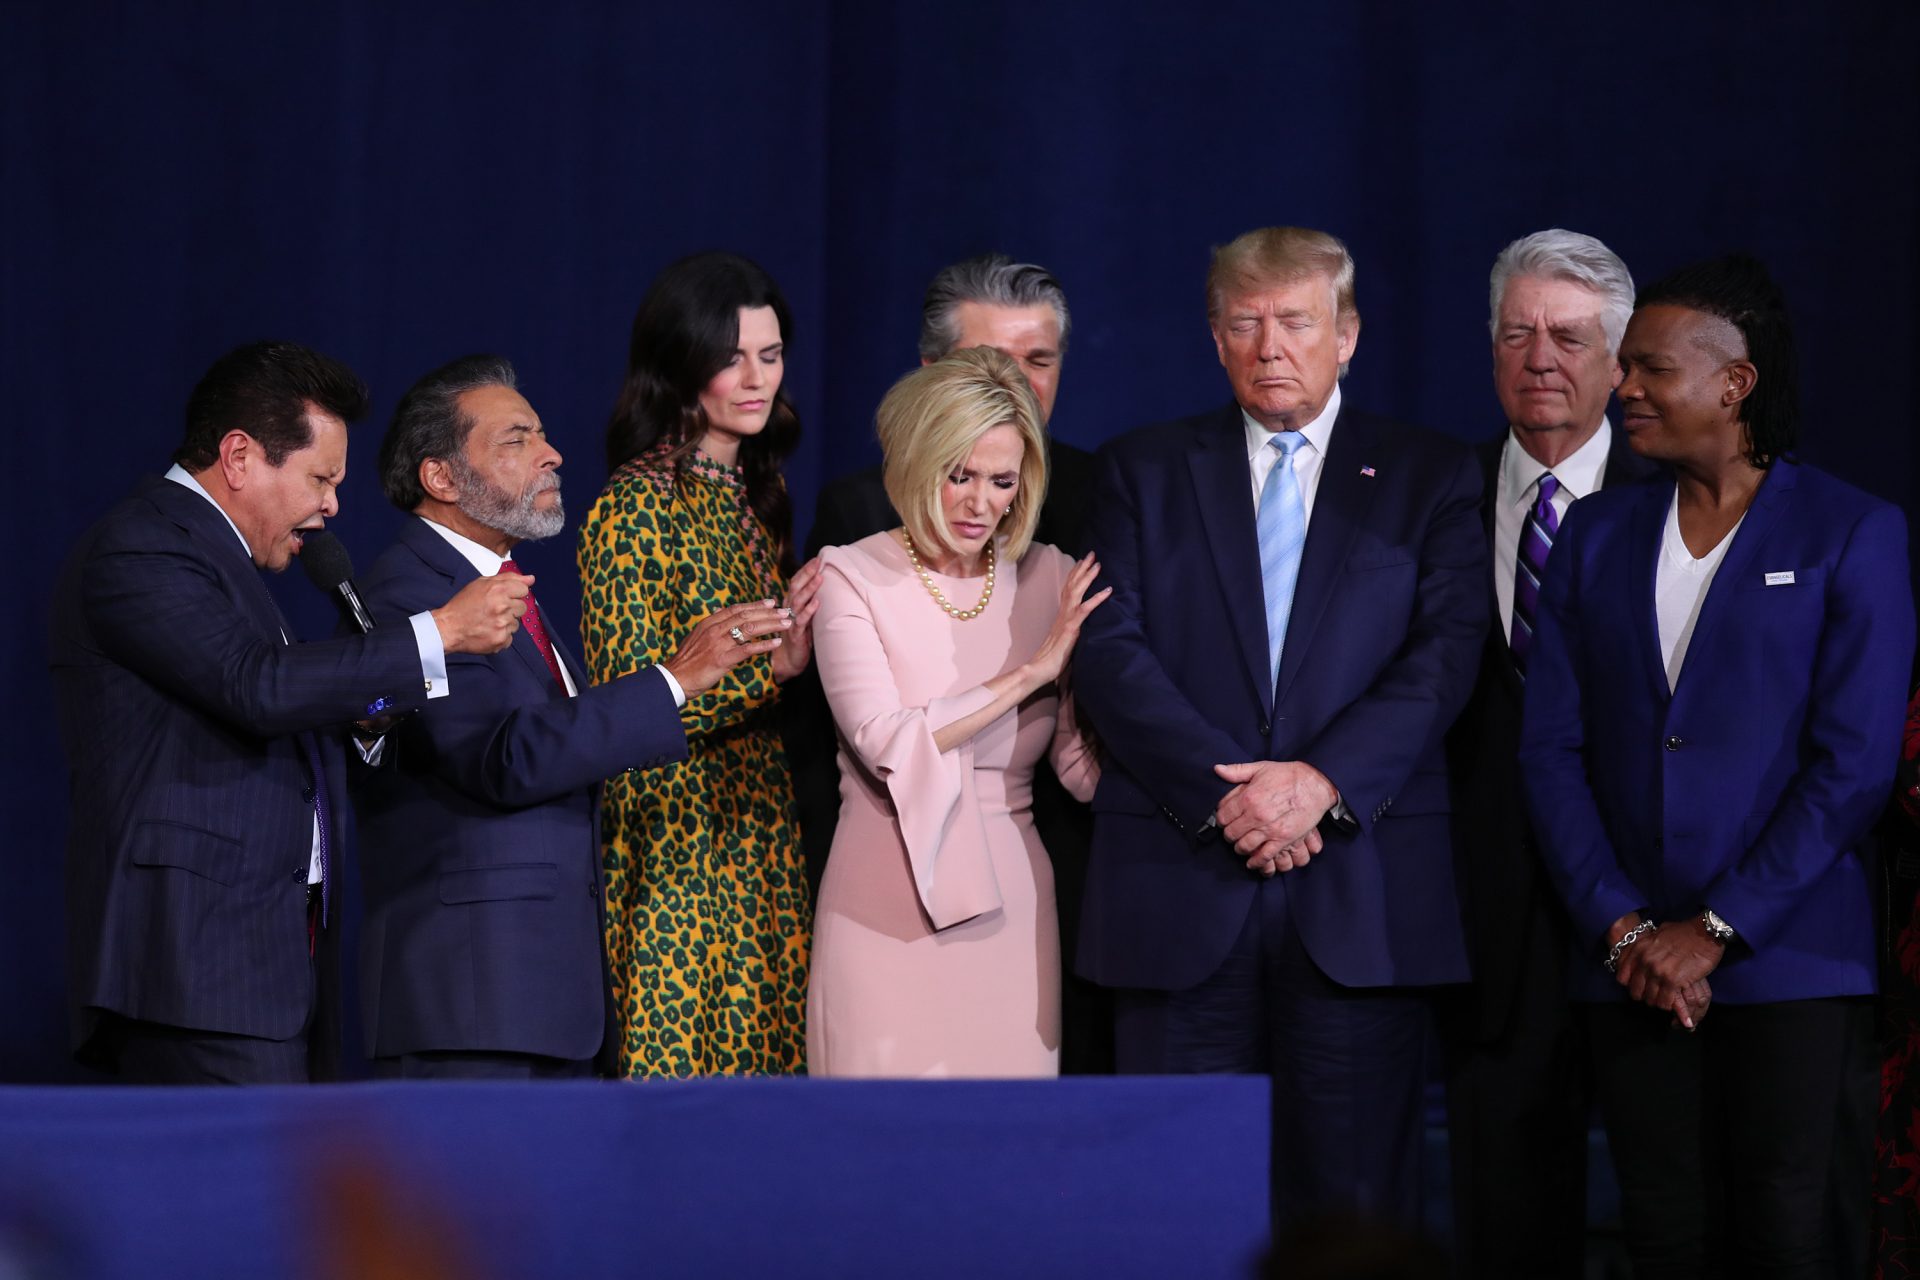 Christian support will help Trump win in 2024